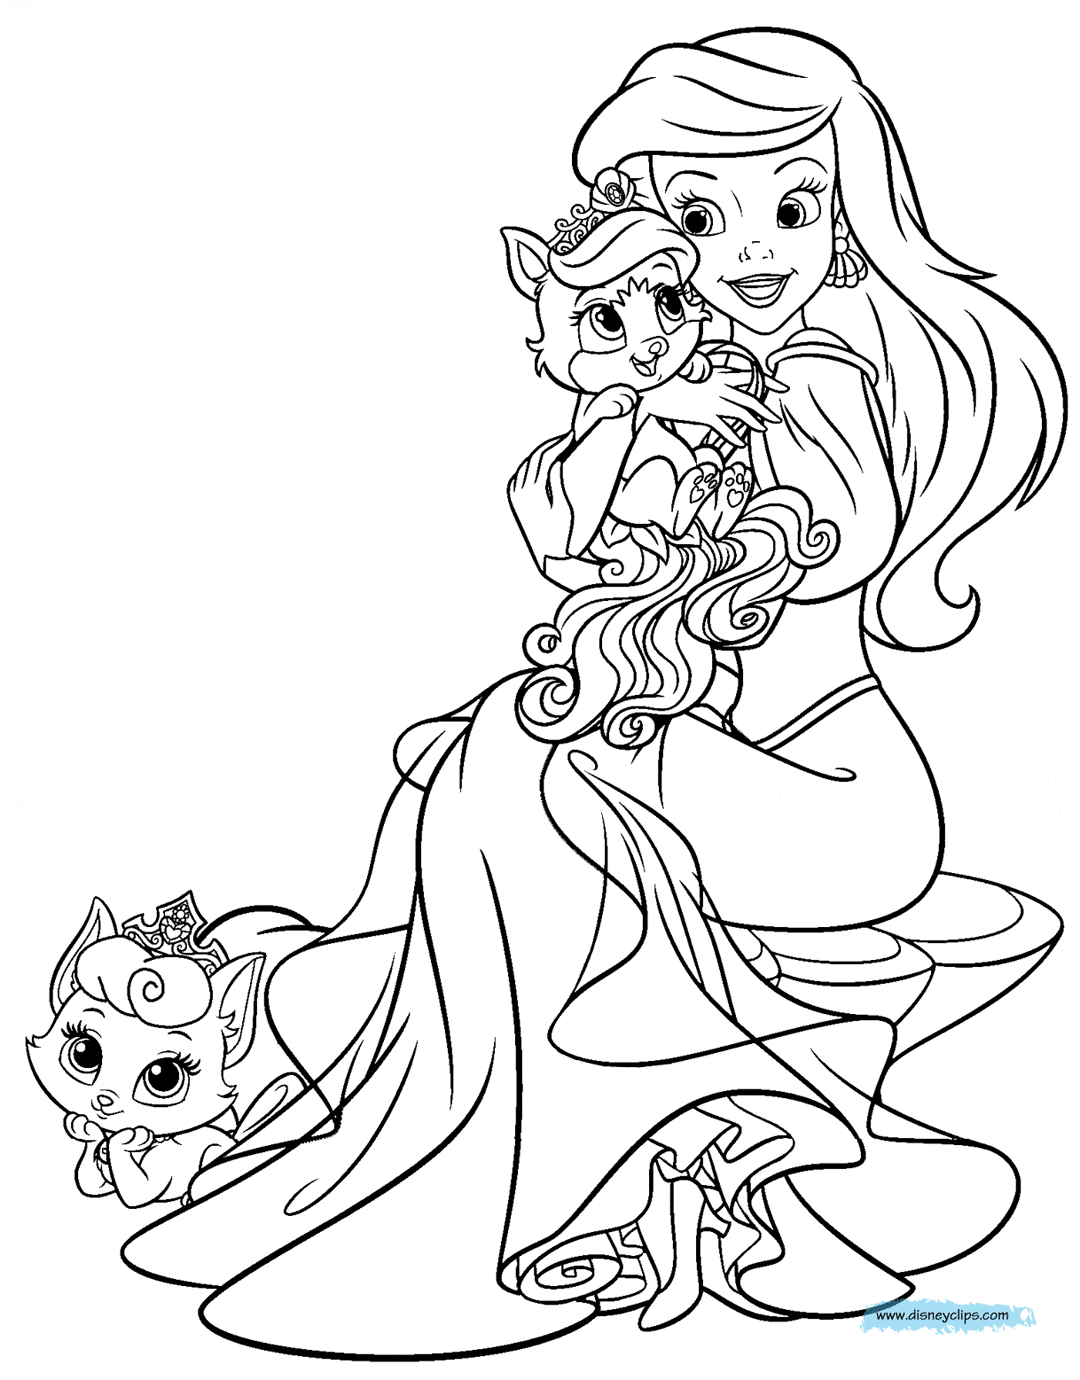 Disney Palace Pets Printable Coloring Pages | Disney ...